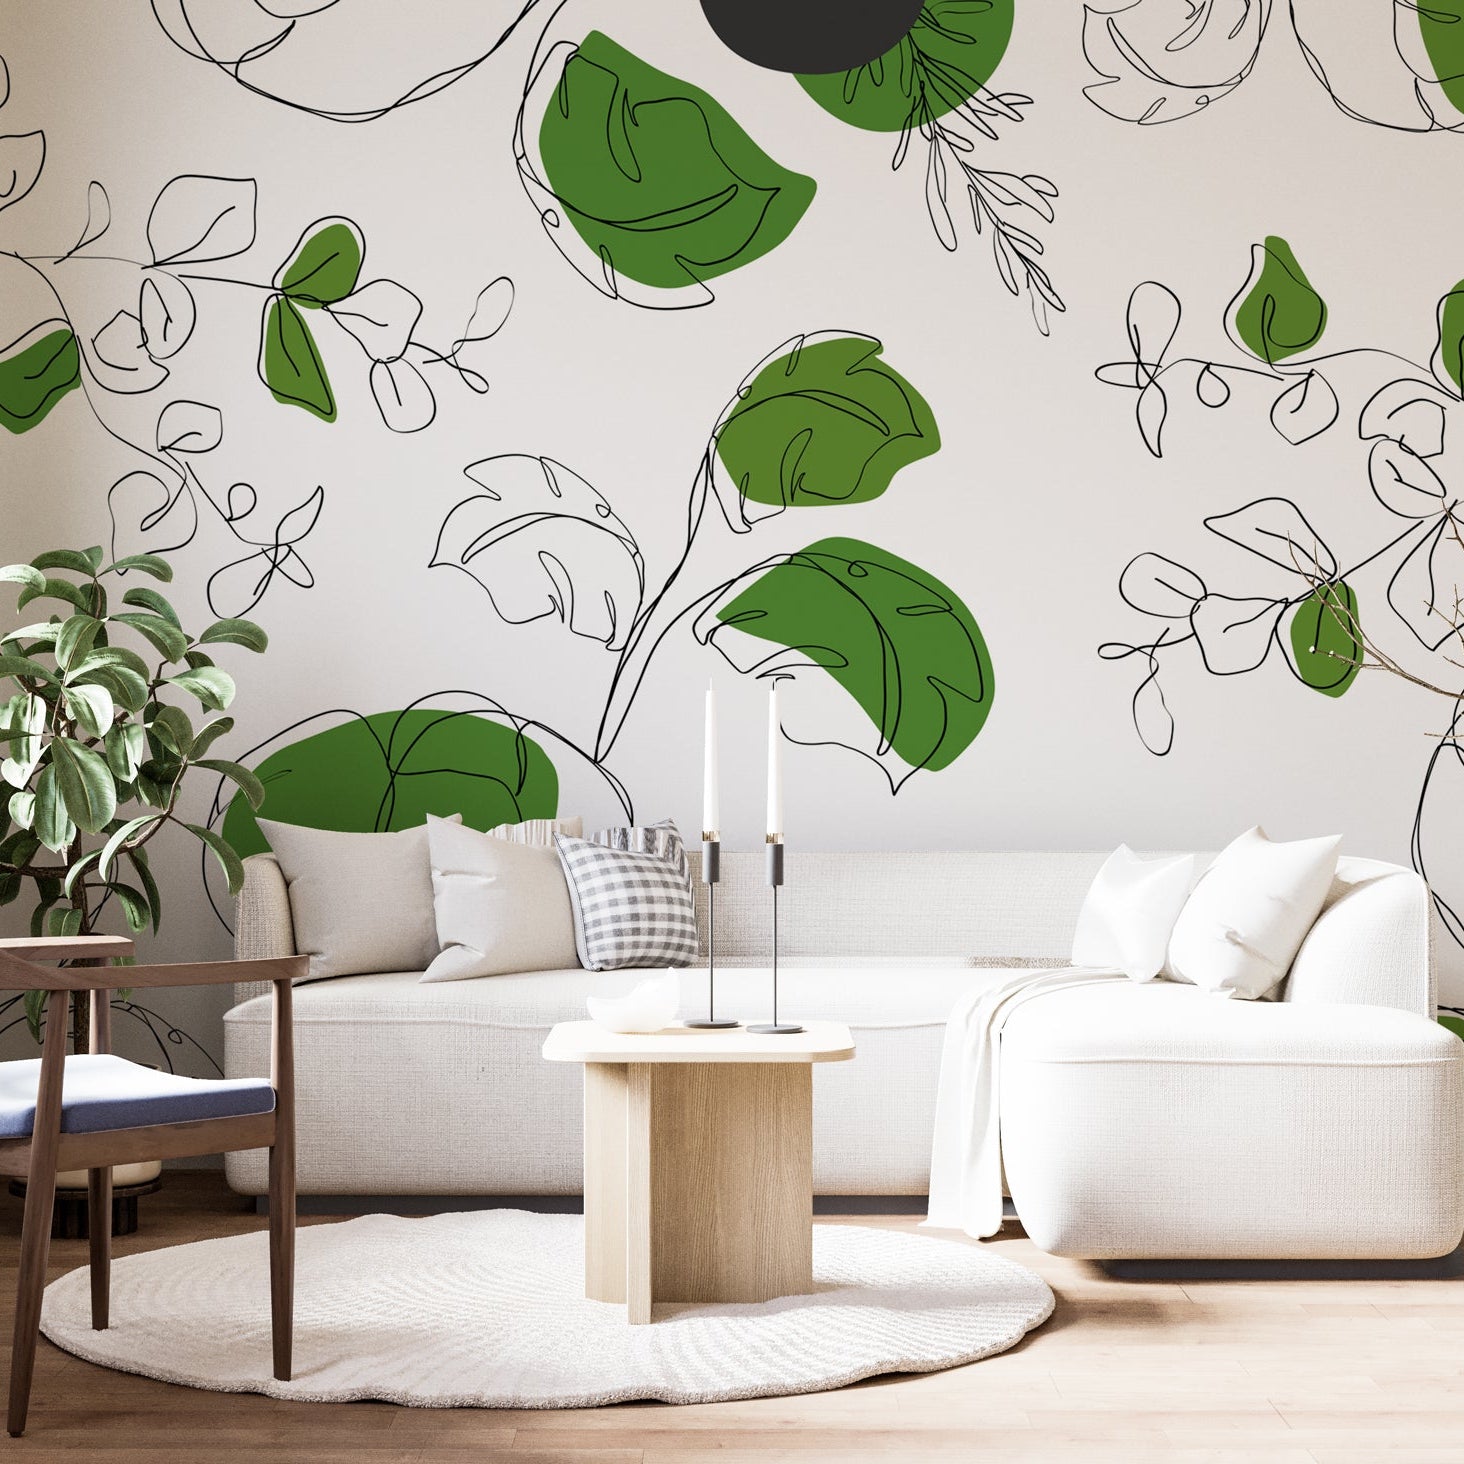 Green Leaf Wallpaper Mural: Transform Your Room with Style-GraffitiWallArt